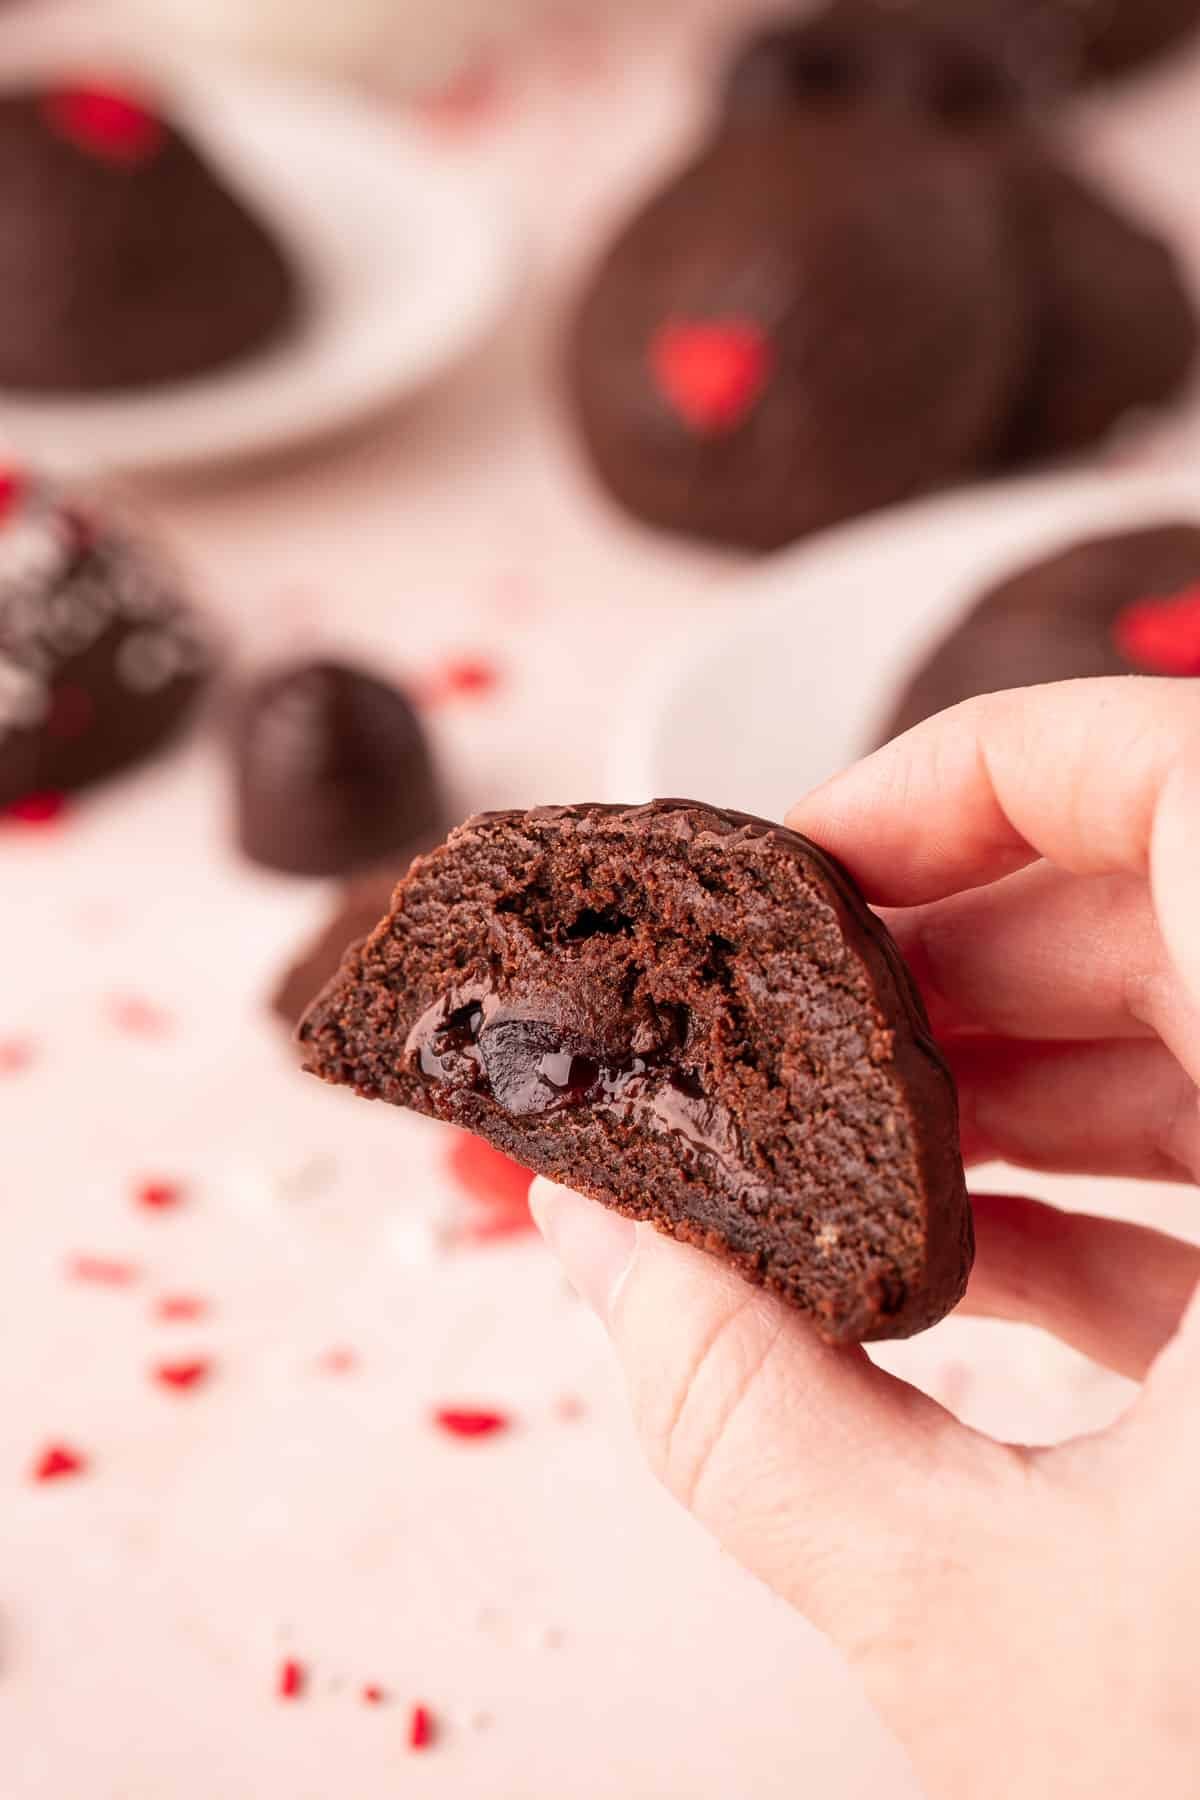 A woman's hand holding a chocolate cookies stuffed with a cherry cordial to the camera.